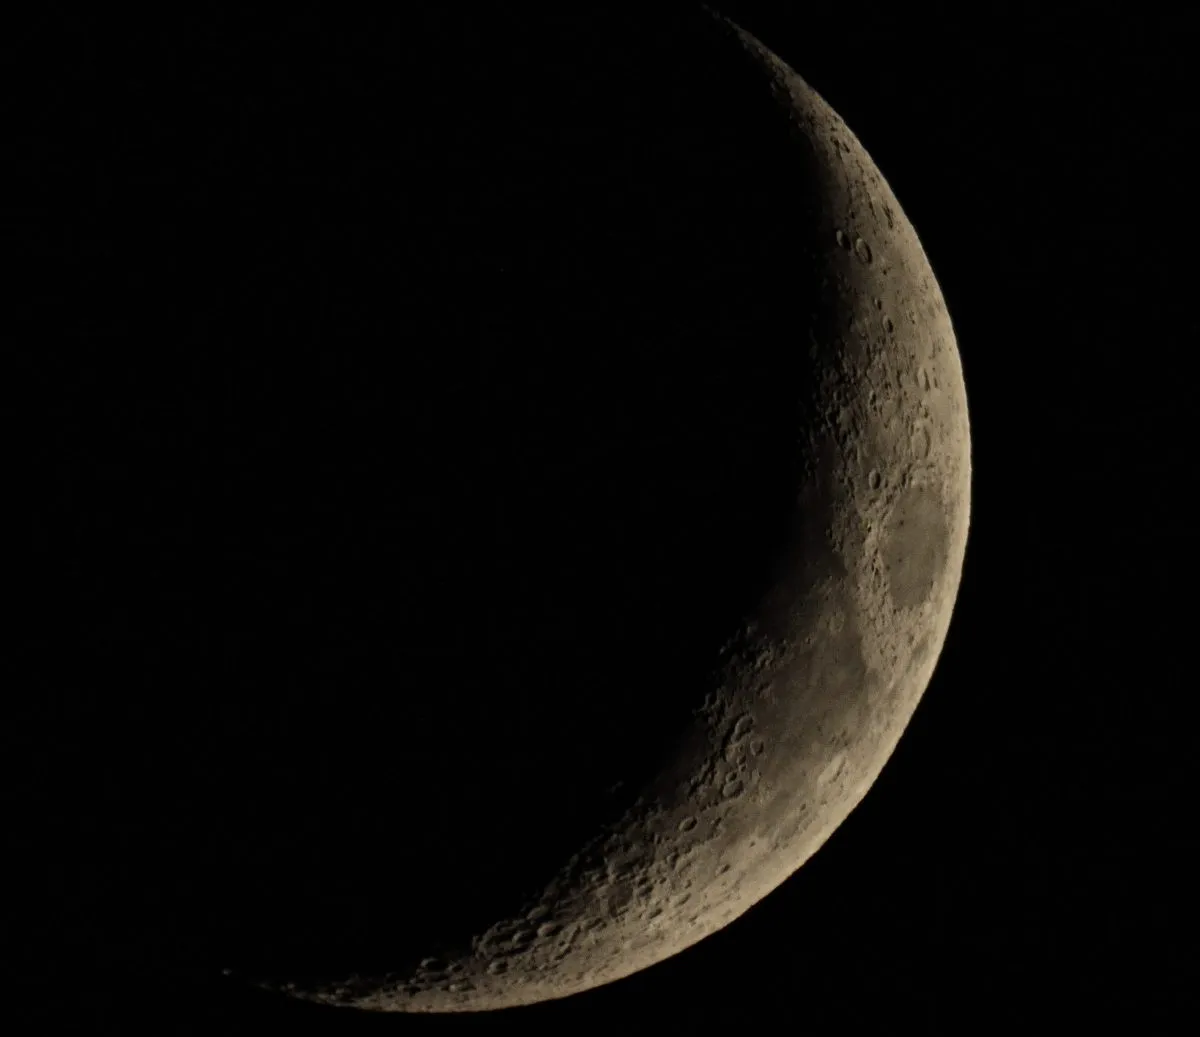 Waxing Crescent Moon by Sarah & Simon Fisher, Bromsgrove, Worcestershire. Equipment: Canon 600D, Mak 127mm